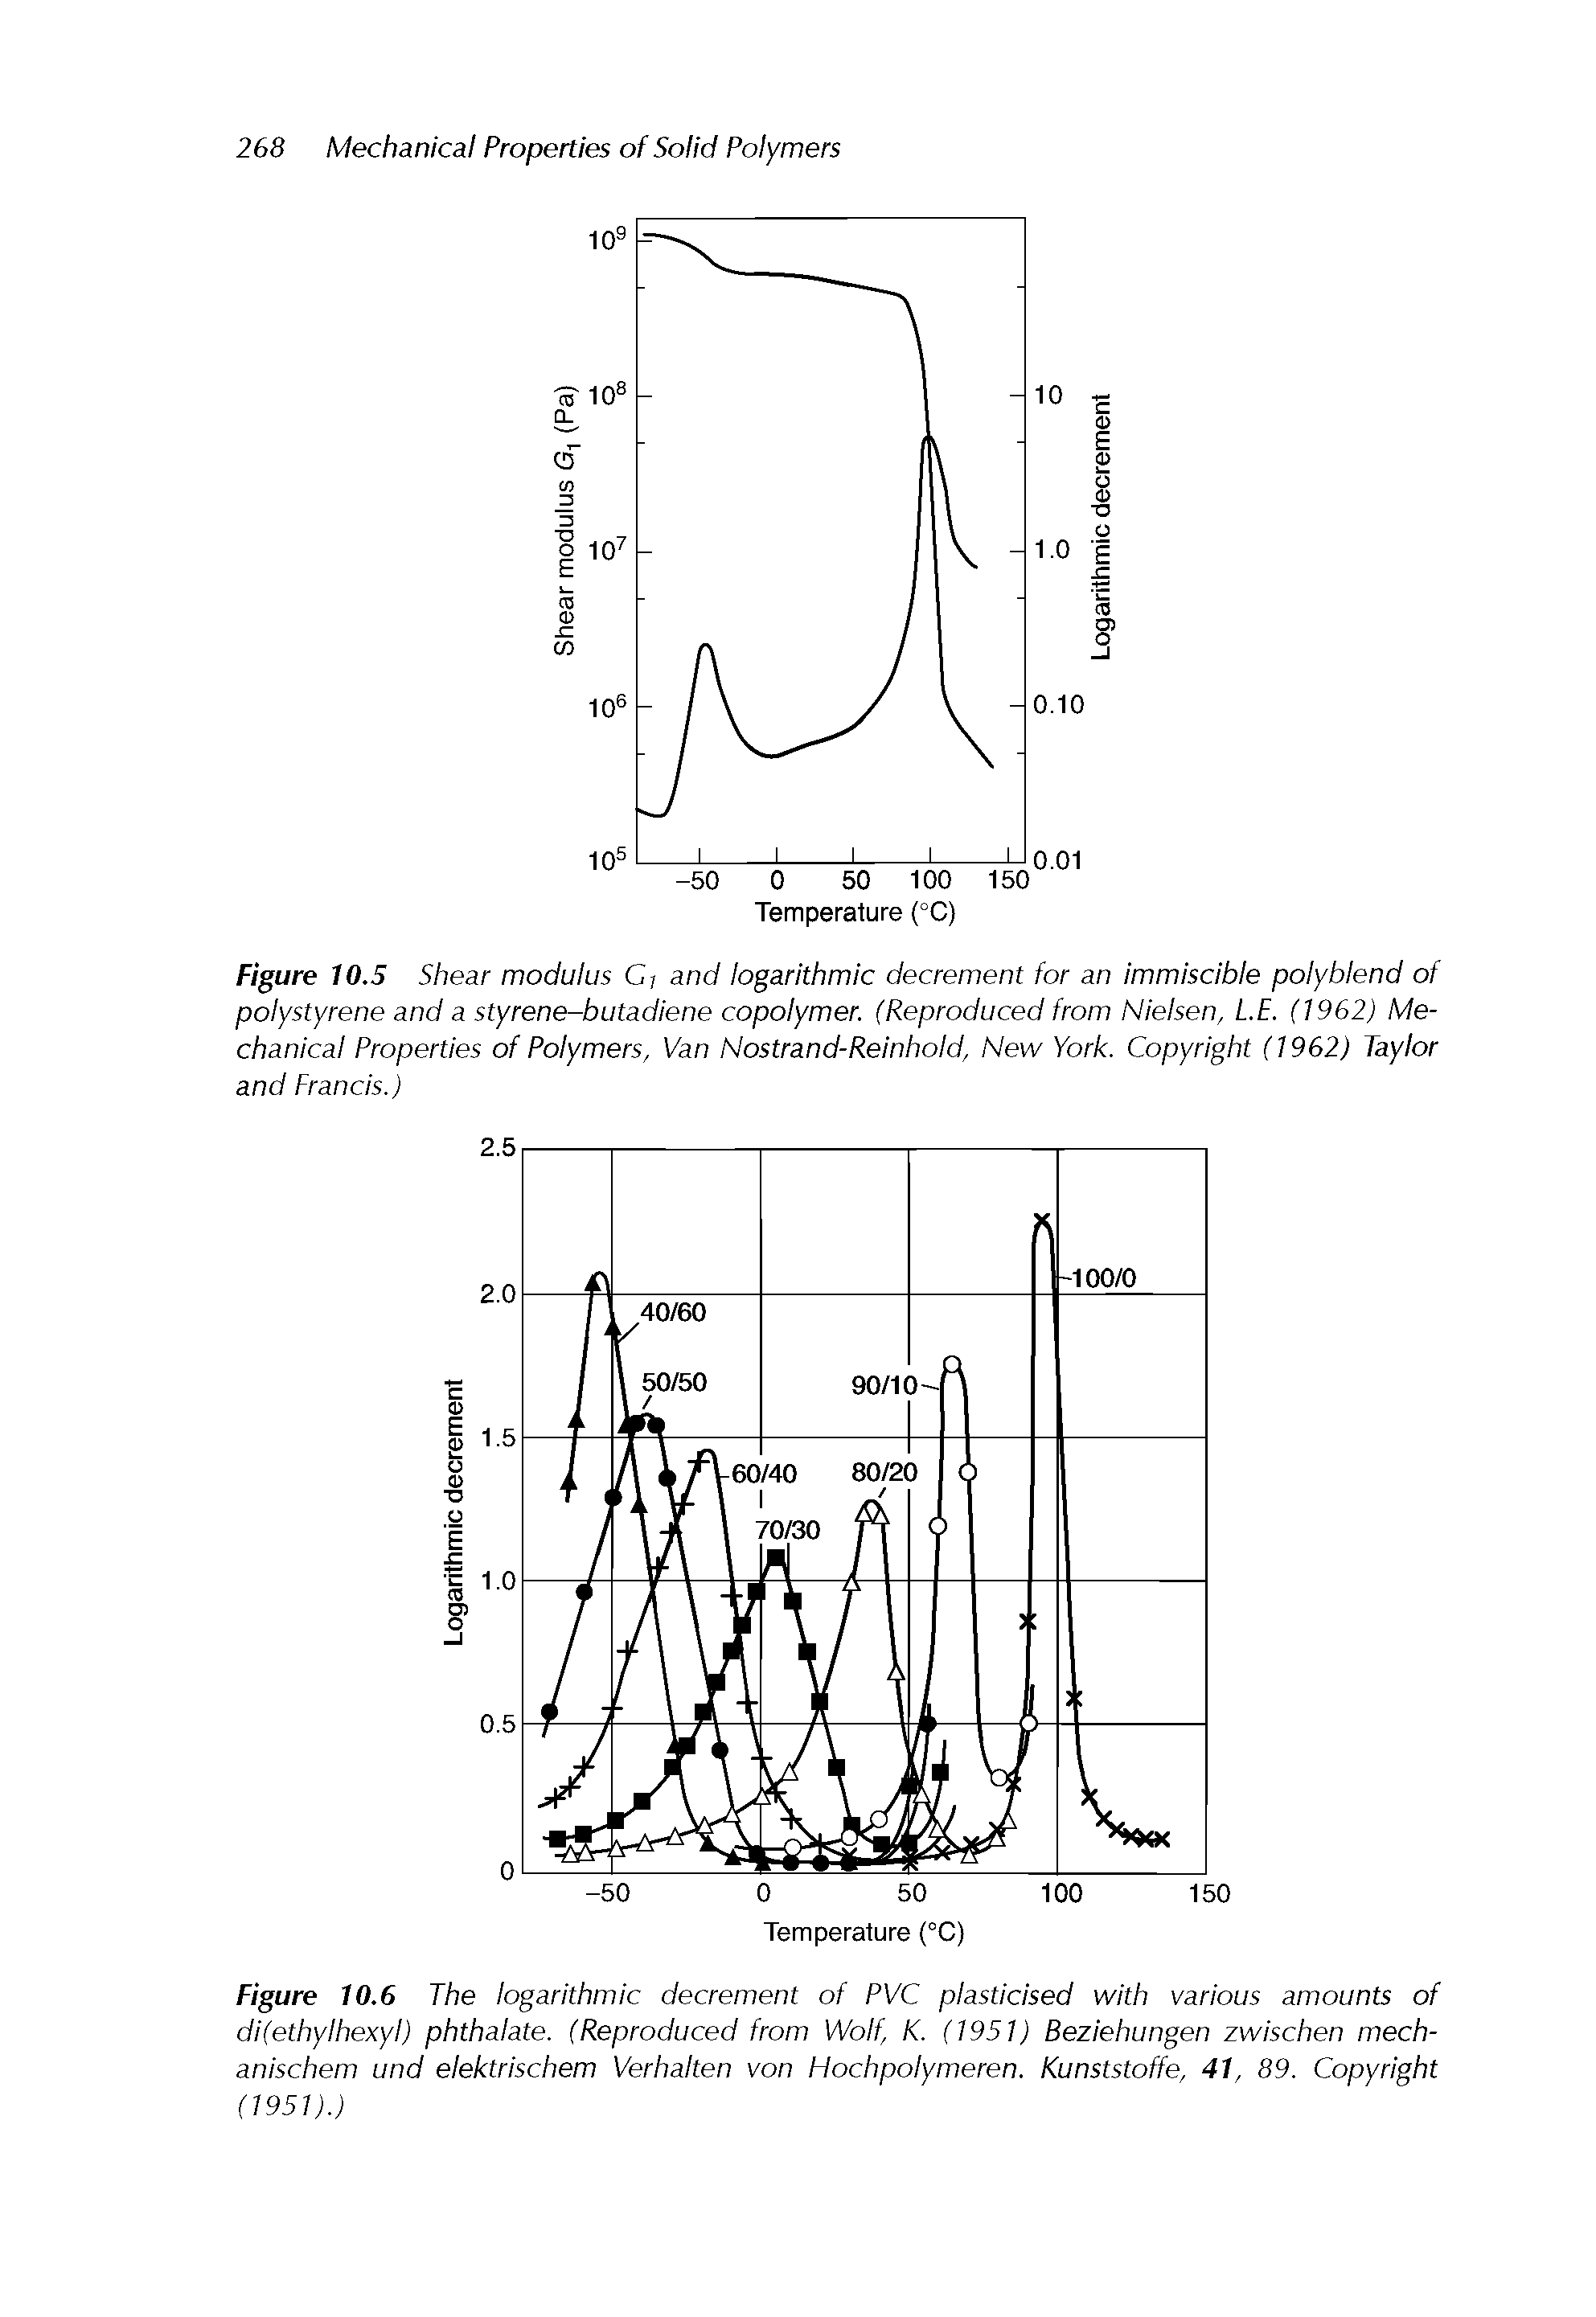 Figure 10.5 Shear modulus Cj and logarithmic decrement for an immiscible poly blend of polystyrene and a styrene-butadiene copolymer. (Reproduced from Nielsen, LE. (1962) Mechanical Properties of Polymers, Van Nostrand-Reinhold, New York. Copyright (1962) Taylor...